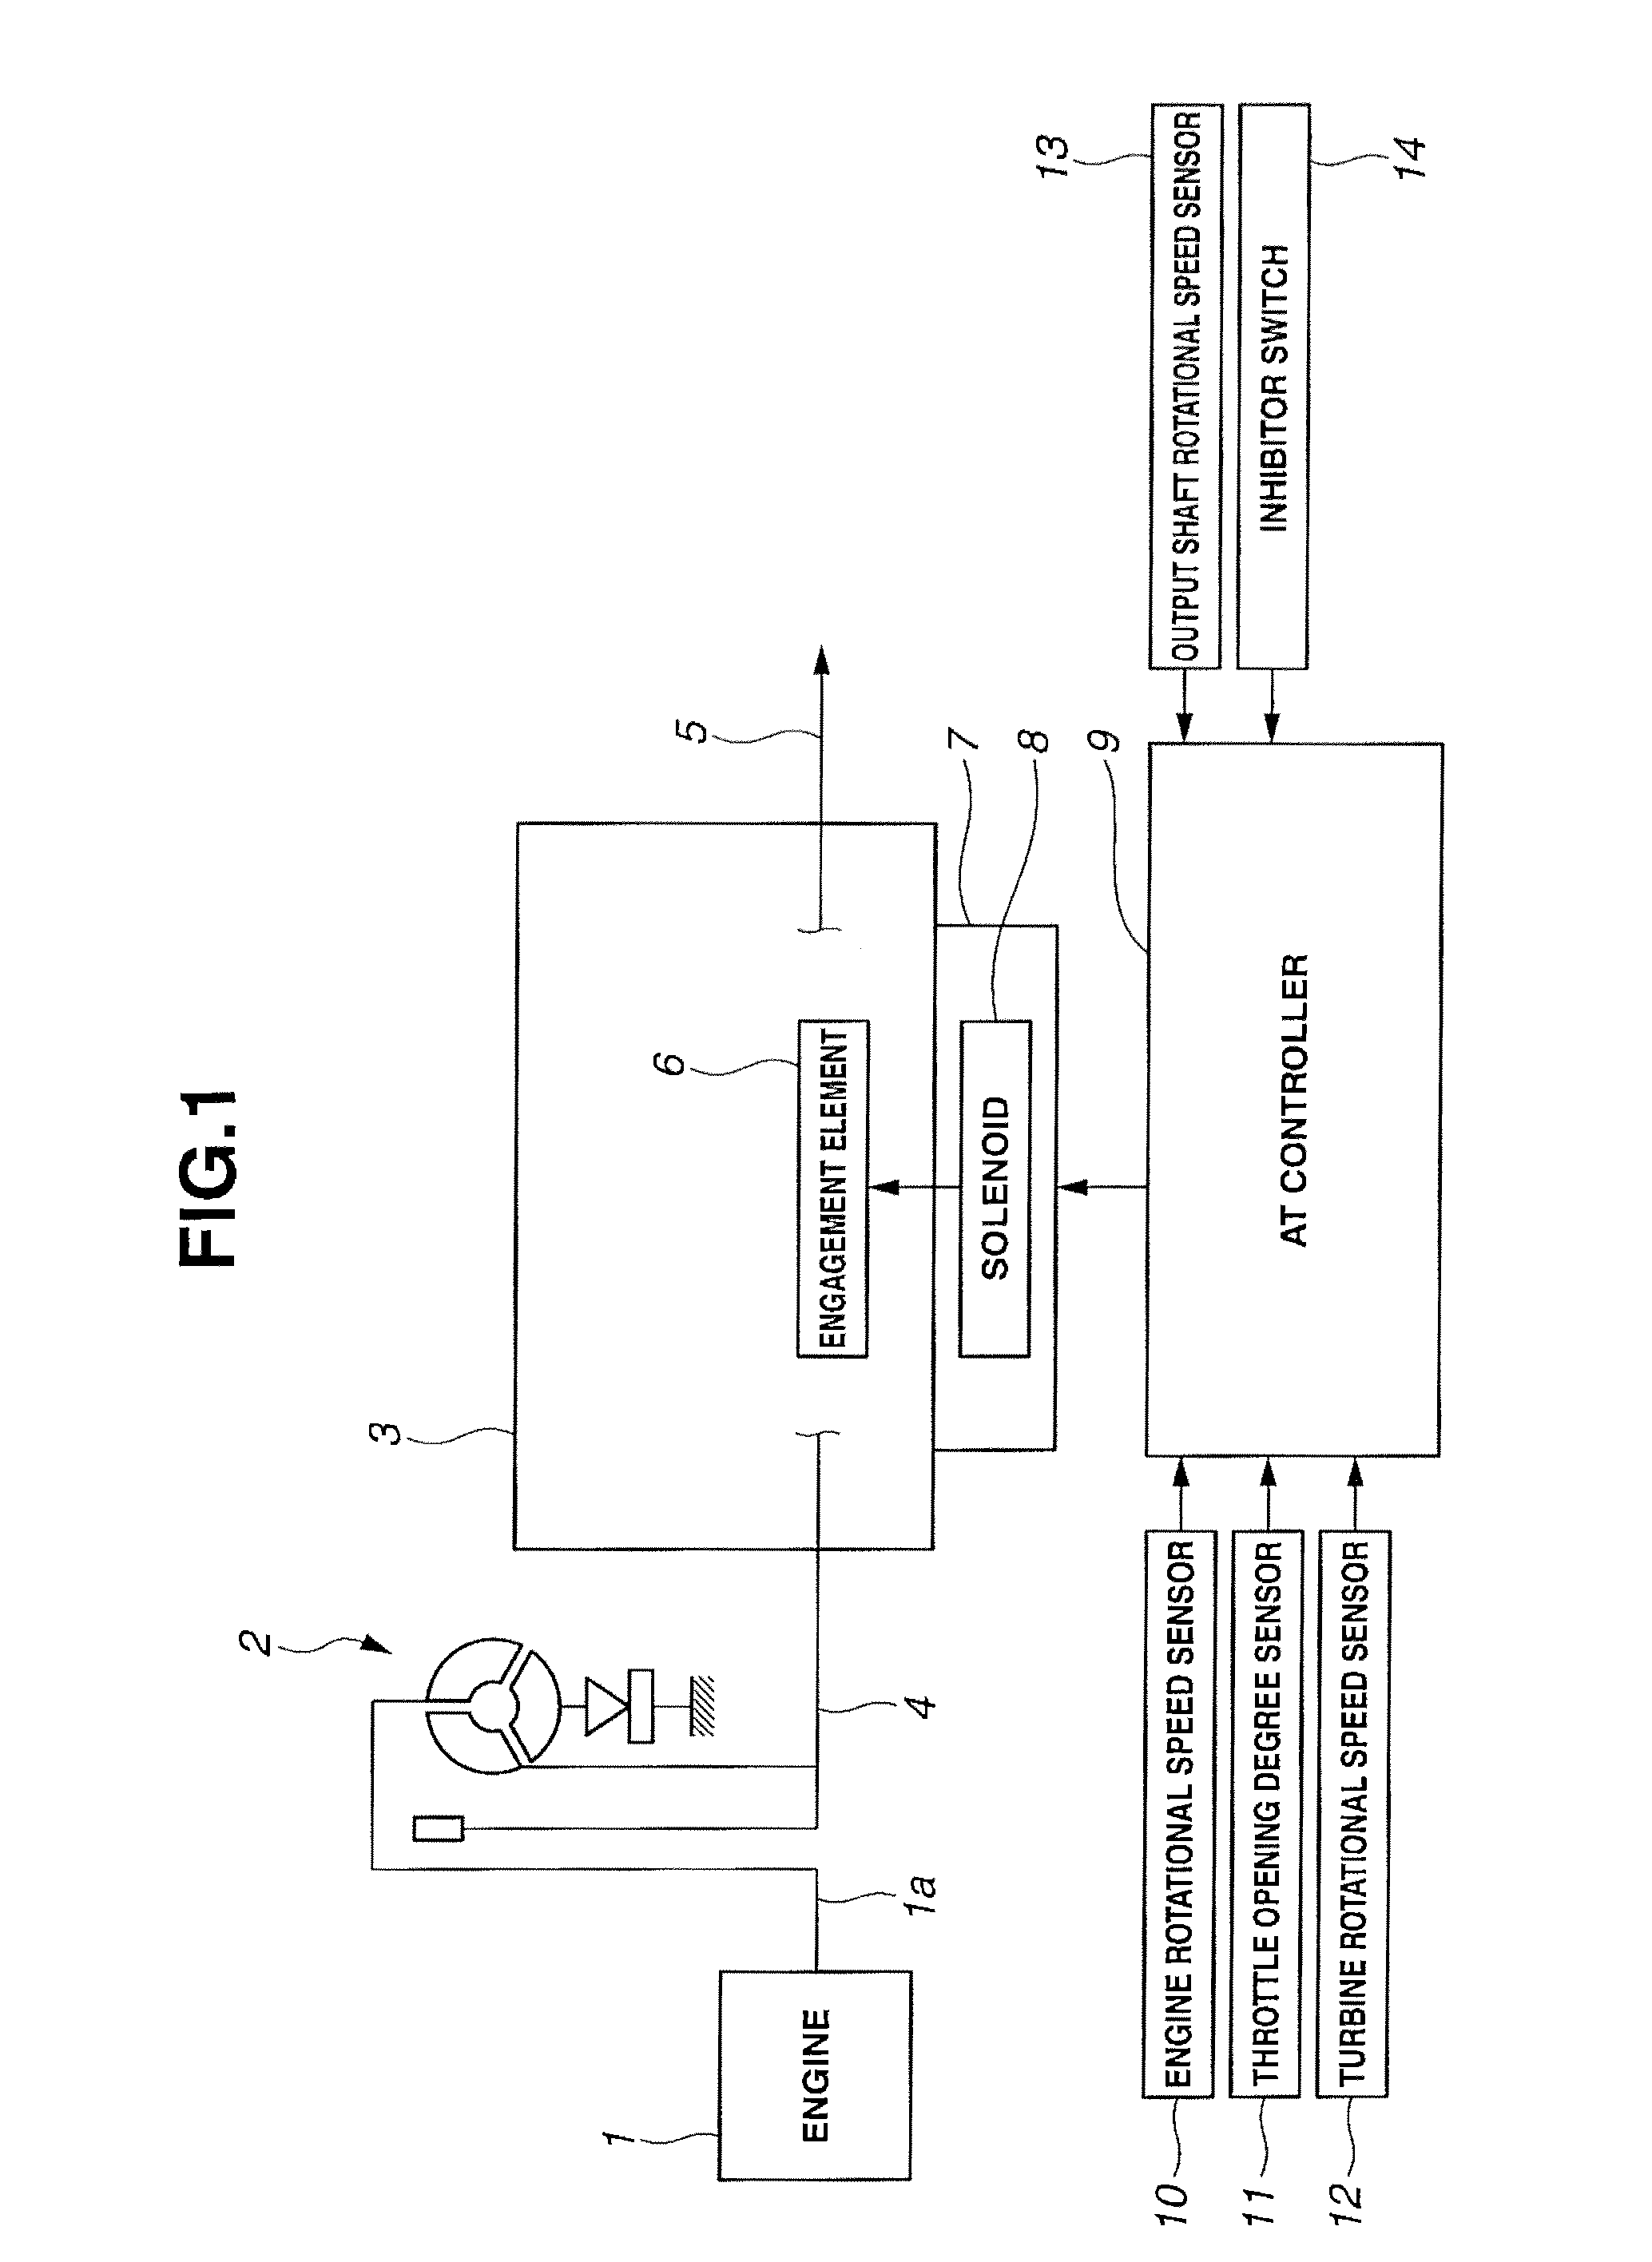 Device for controlling automatic transmission